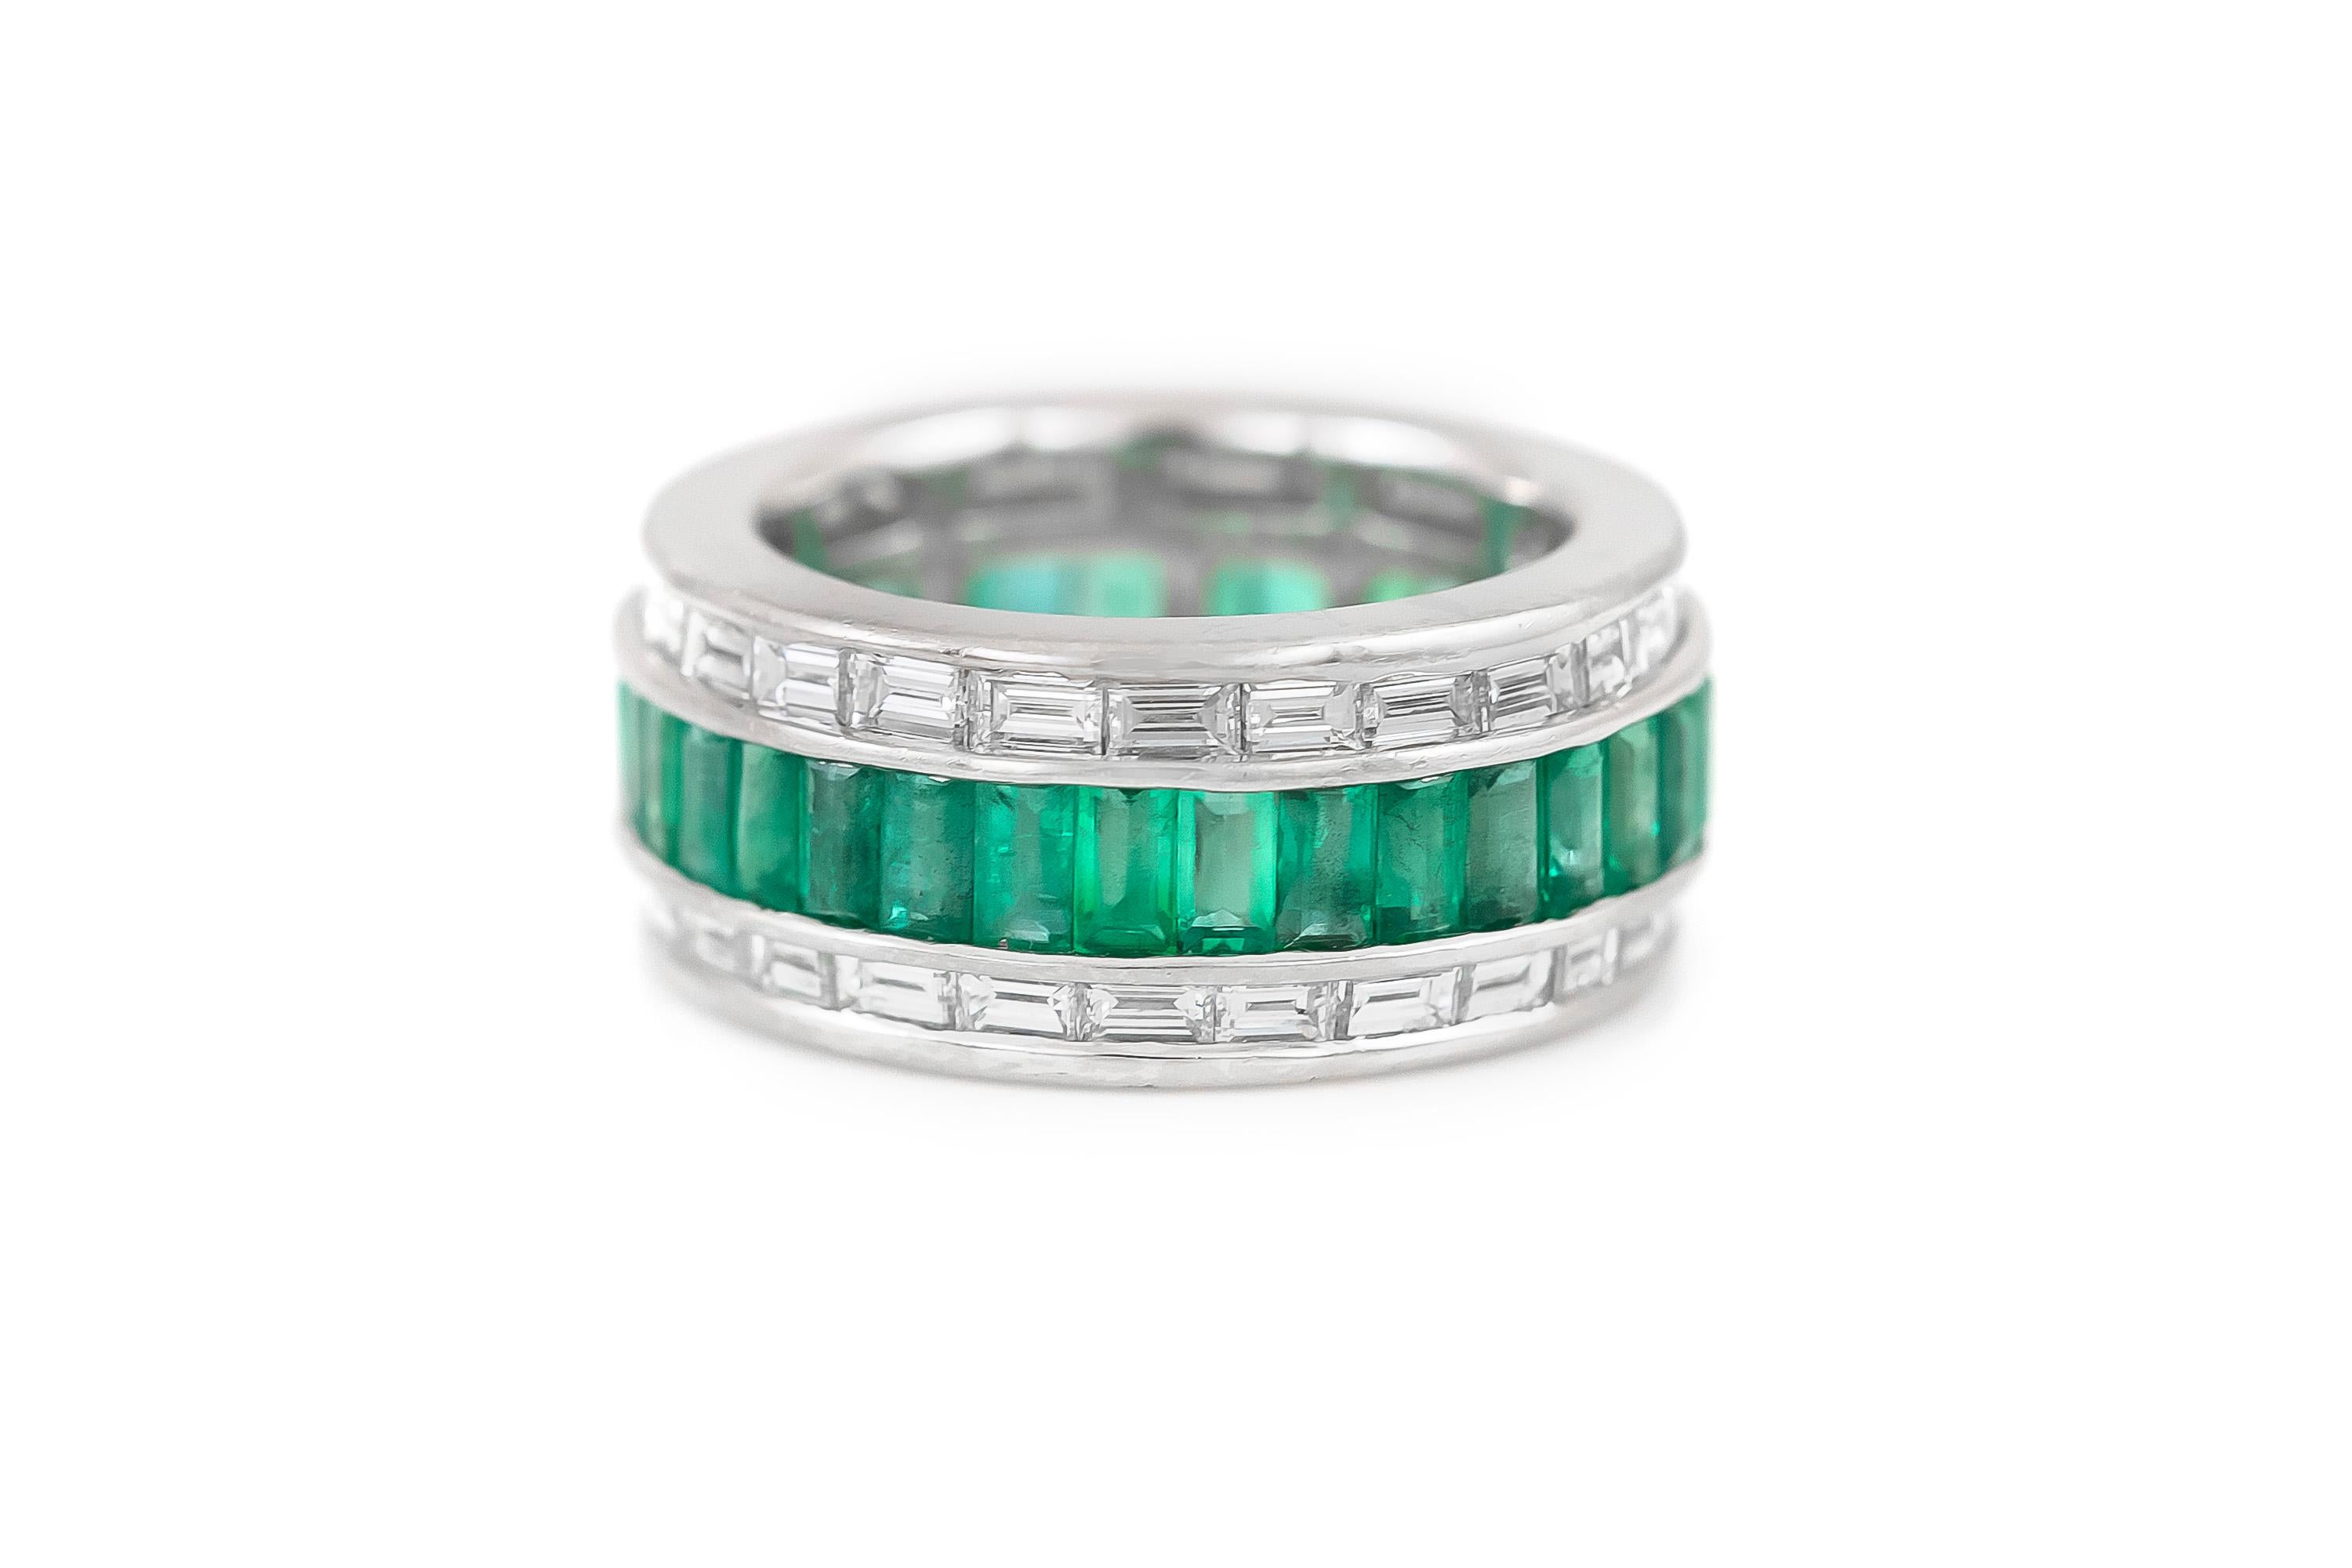 The ring is finely crafted in platinum with diamonds weighing approximately total of 3.00 carat and emeralds weighing approximately total of 4.03 carat.
Circa 1940.